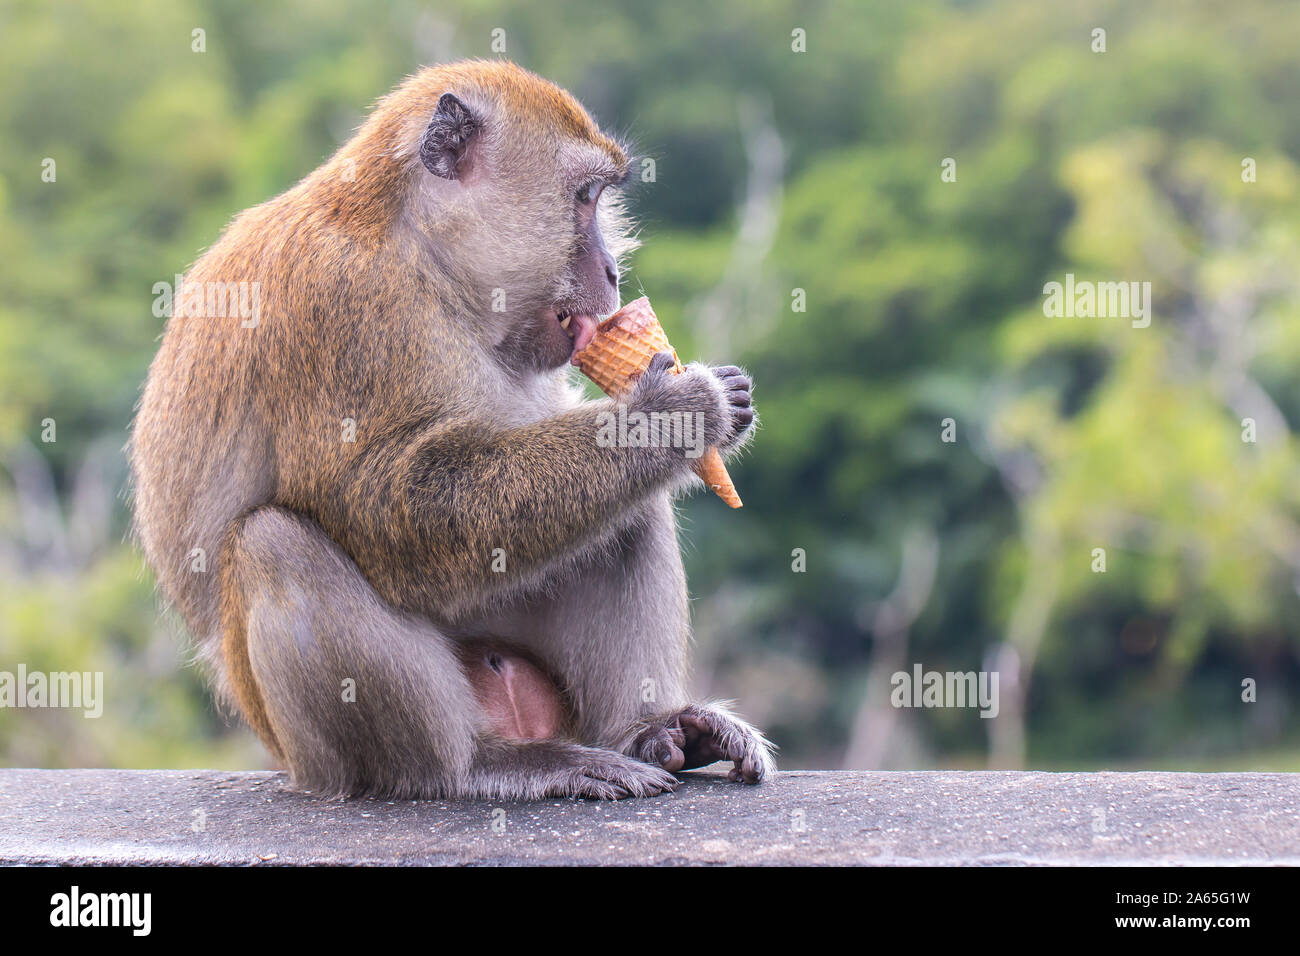 Long-tailed macaque (Macaca fascicularis) licking on an ice-cream it snatched from a child. Stock Photo